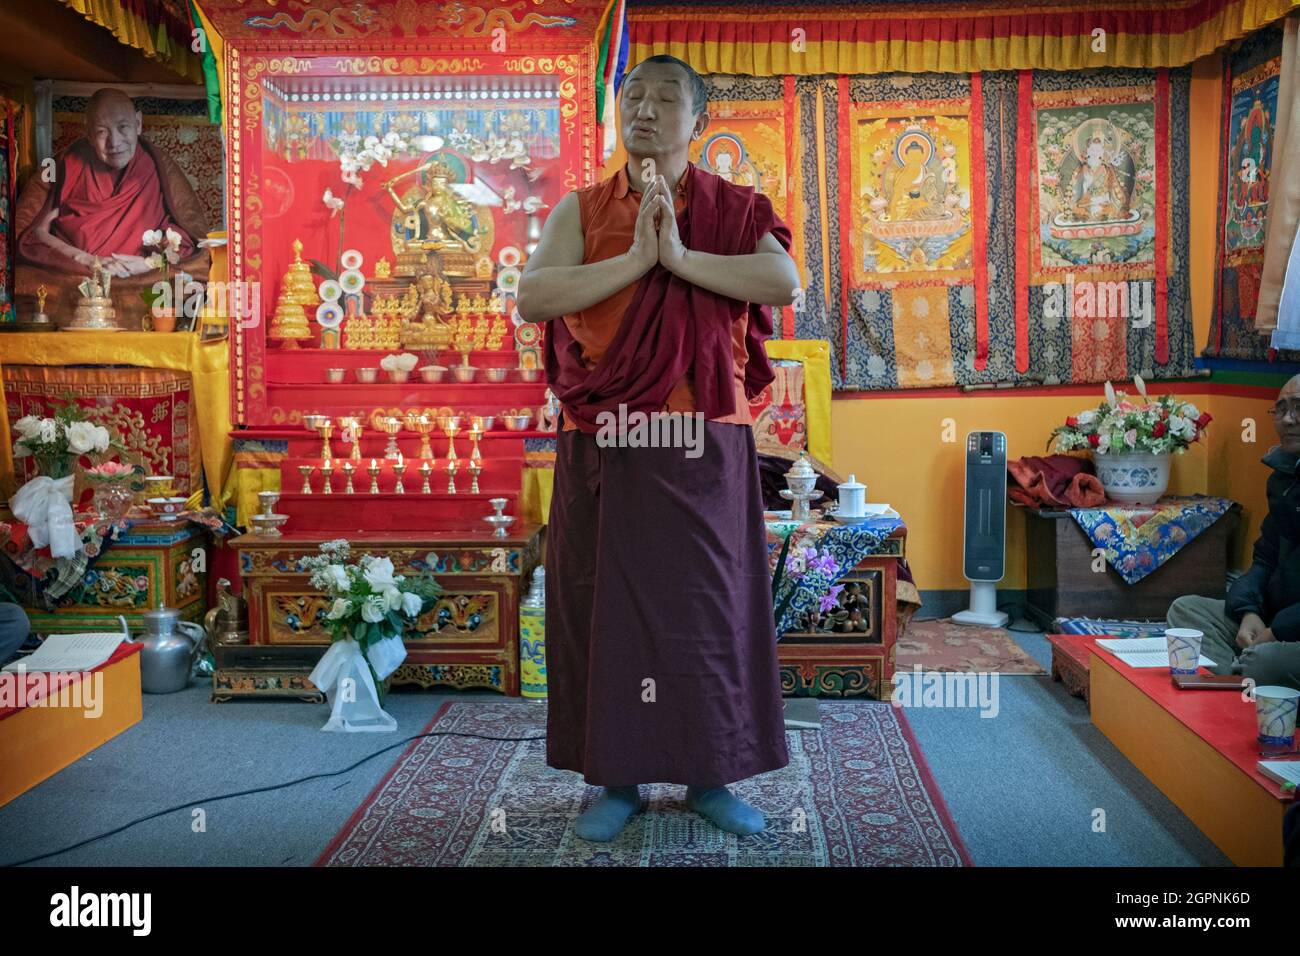 A monk from a Sherpa congregation lectures his congregation in Nepalese & Tibetan on hand gestures during prayer. In Elmhurst, Queens, New York City. Stock Photo